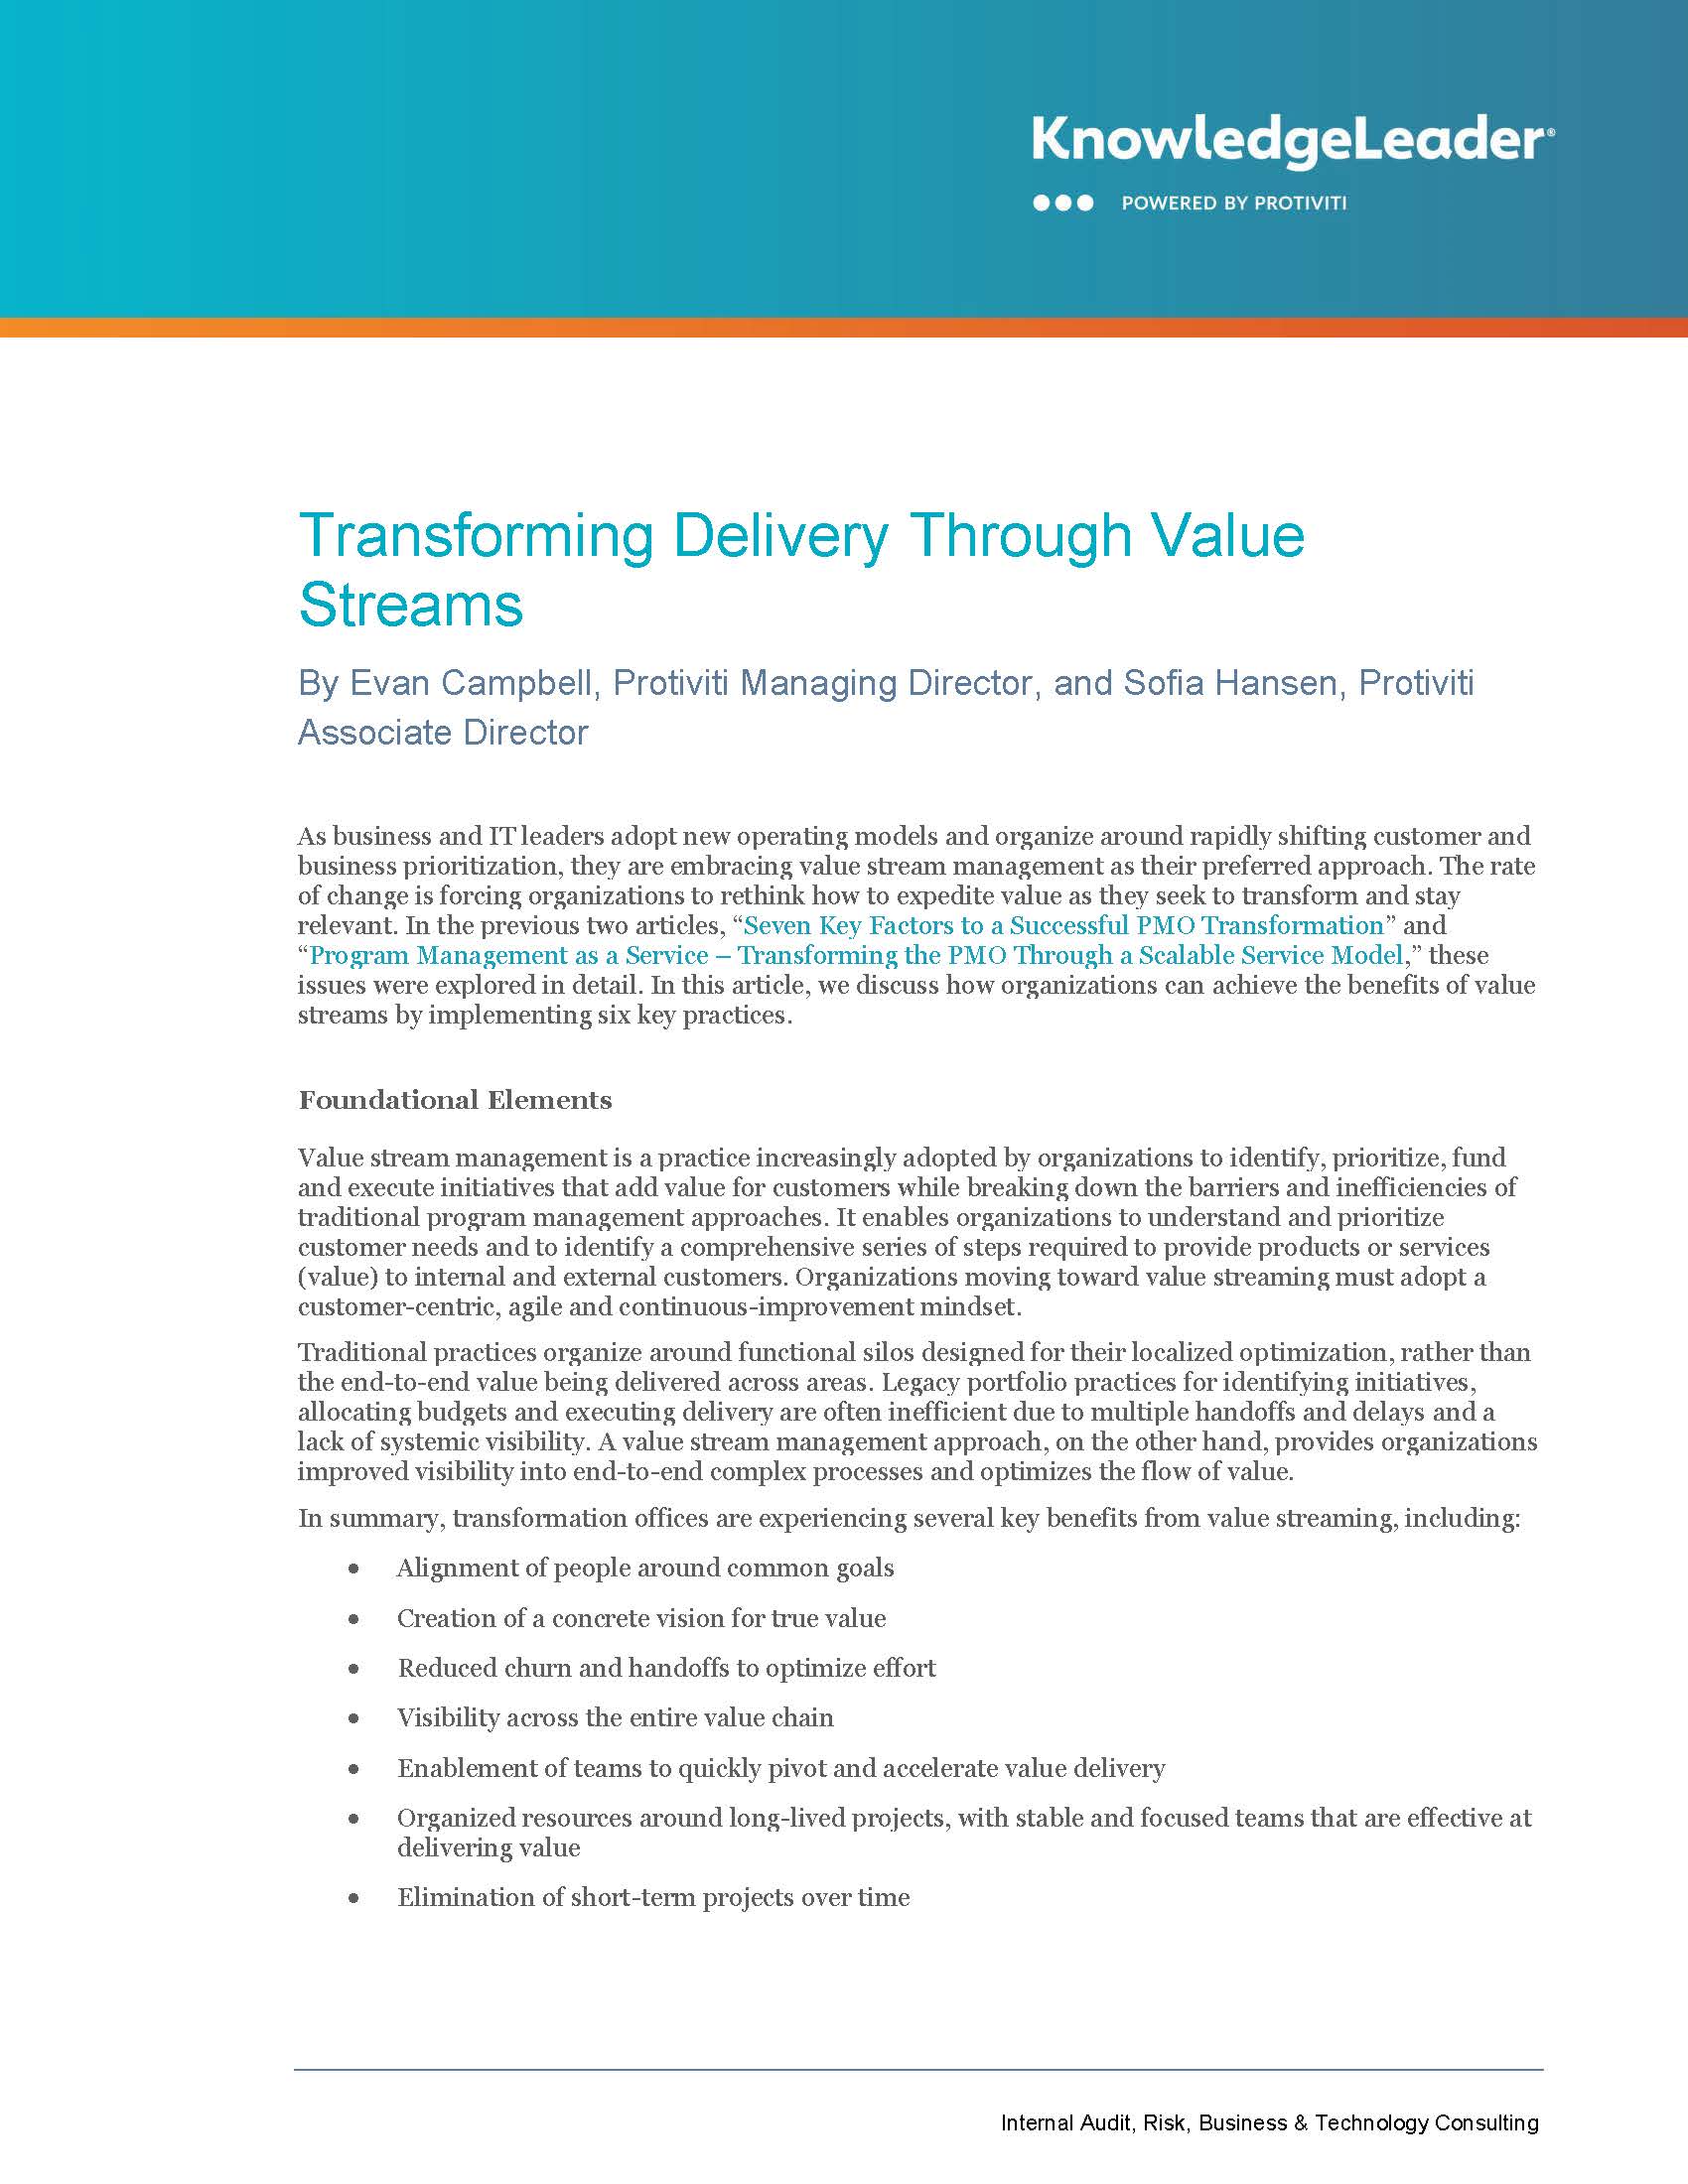 Screenshot of the first page of Transforming Delivery Through Value Streams